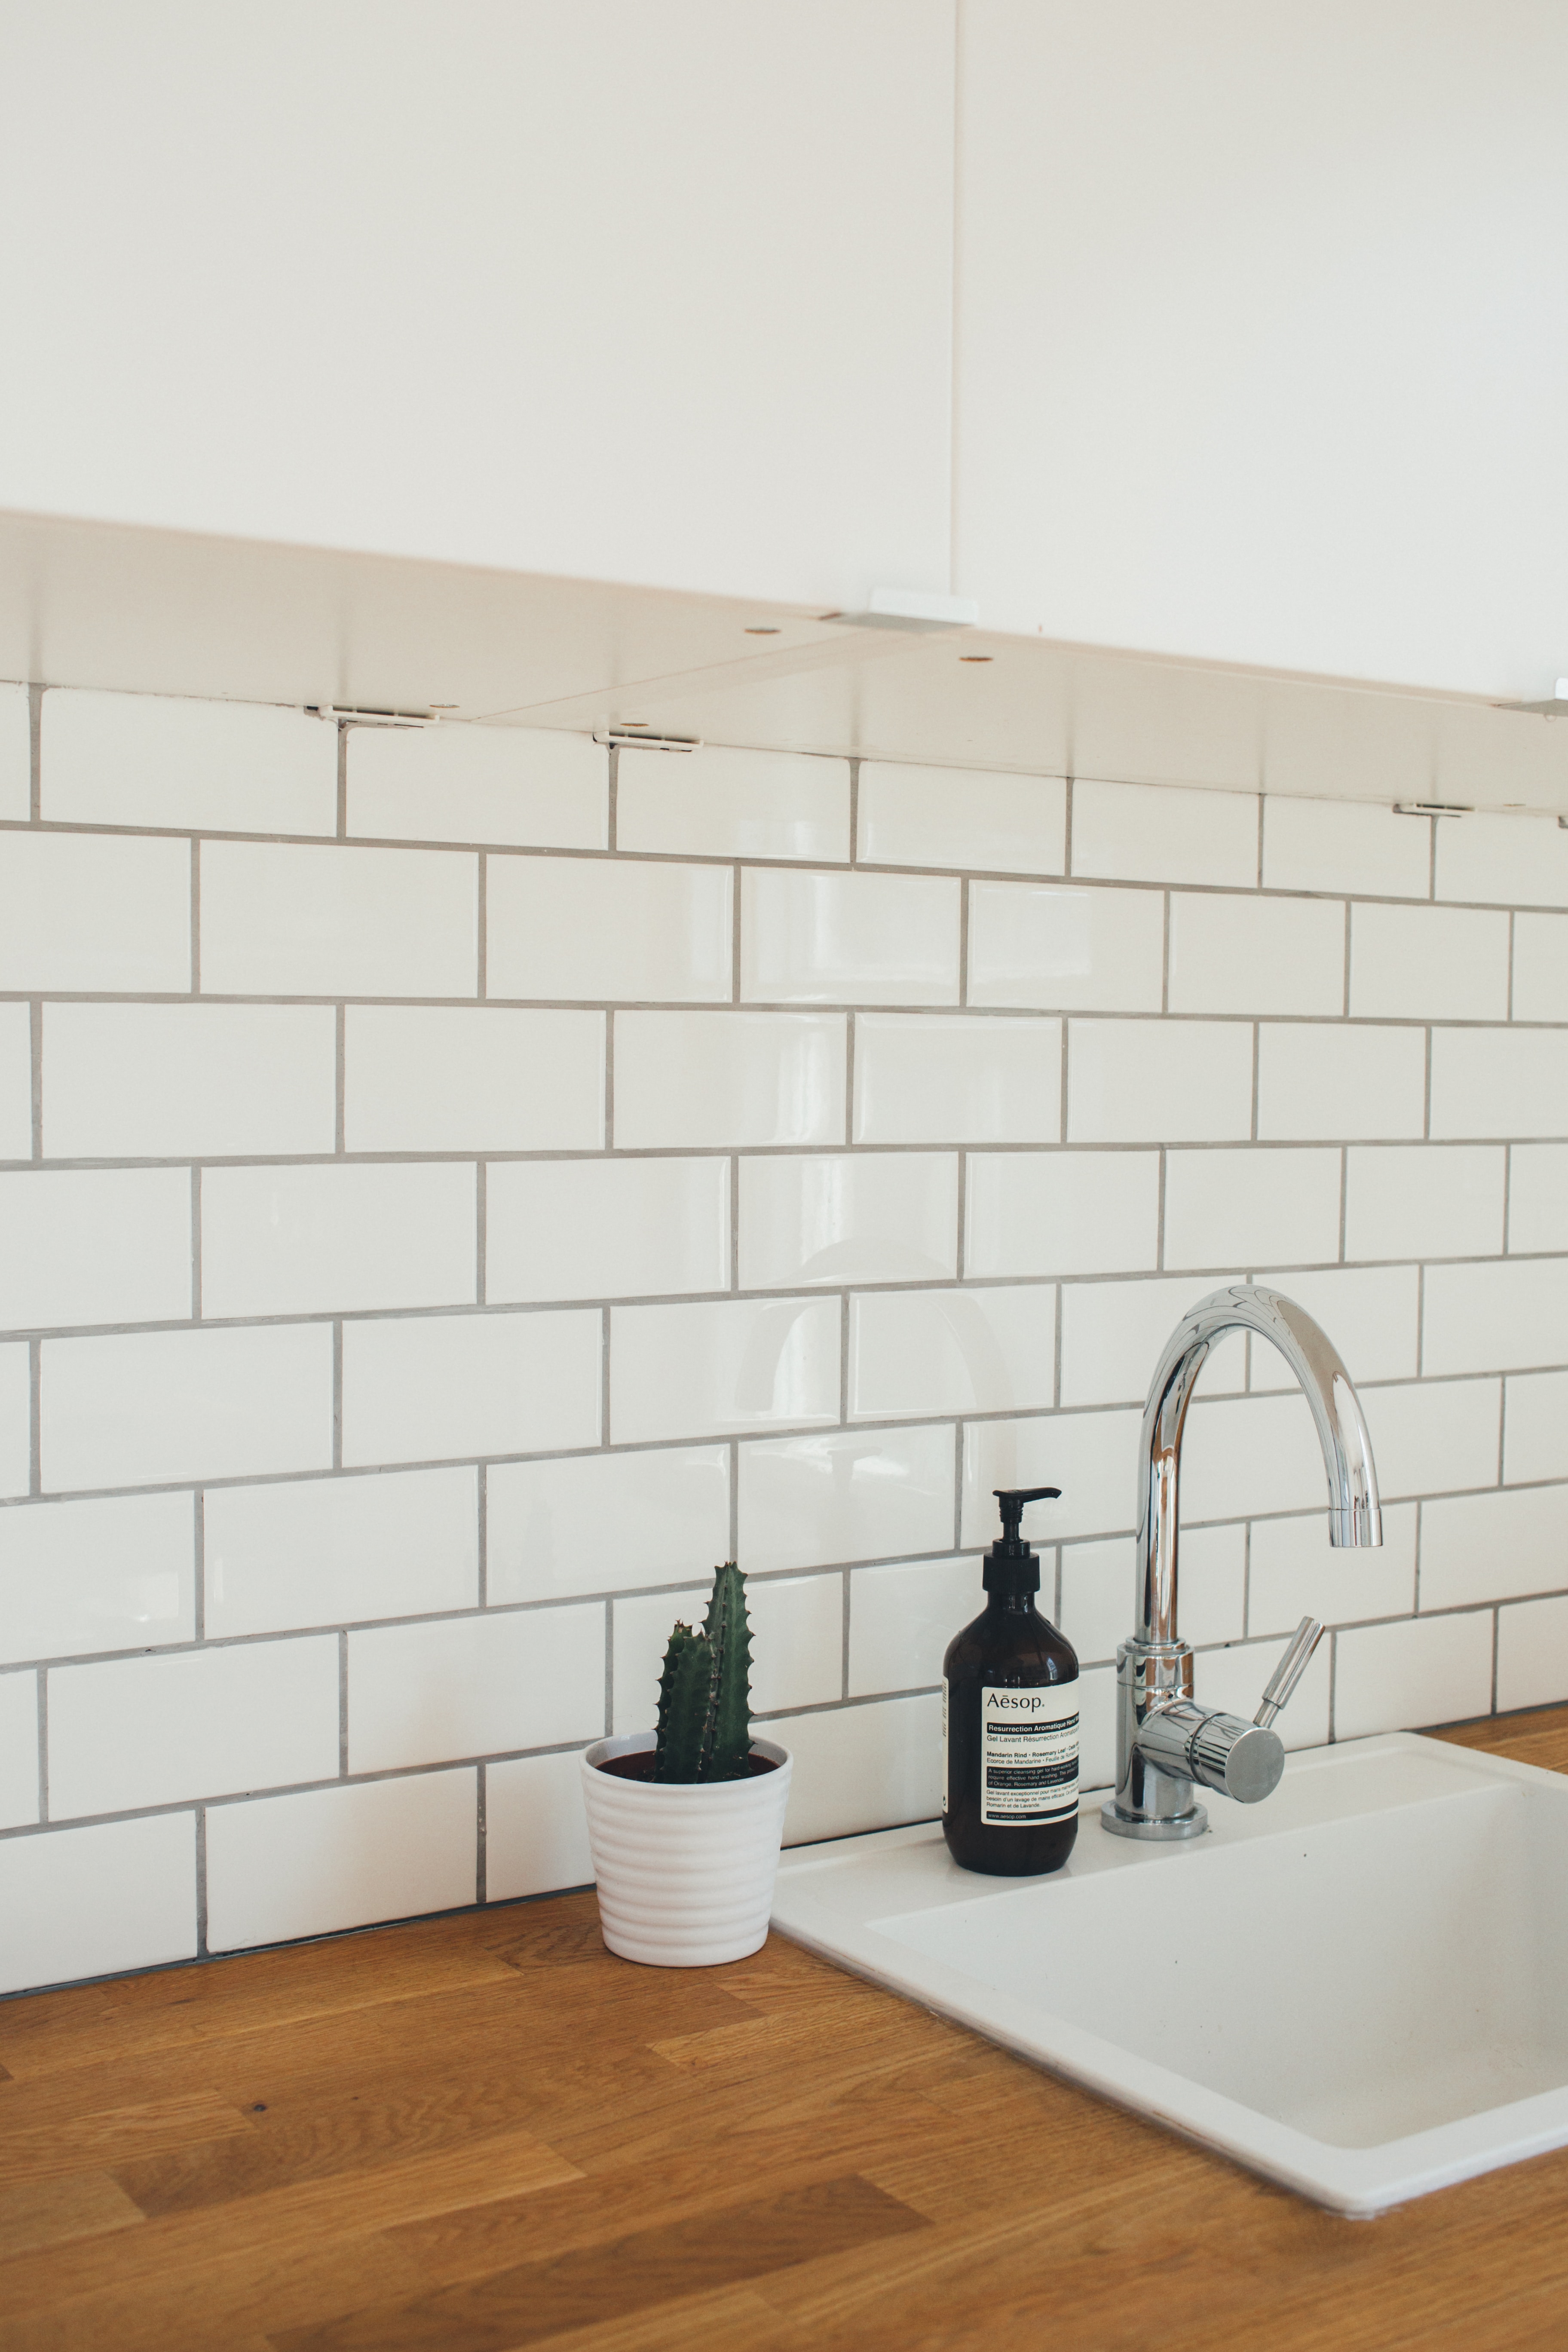 How to Tile Grout and Caulk a Shower Yourself, Home Matters